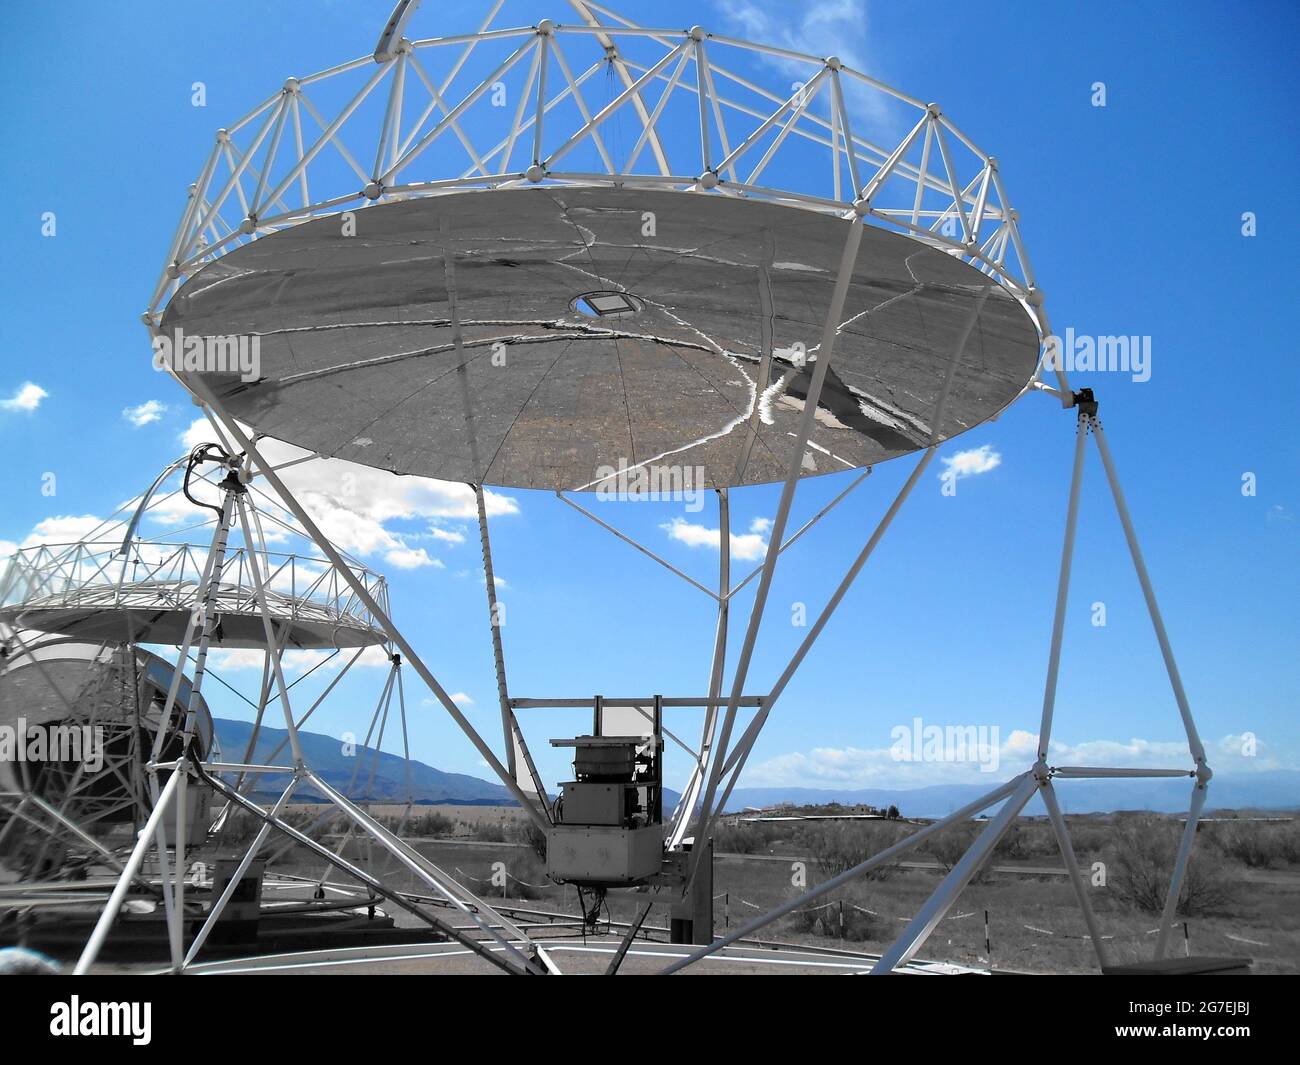 Dish concentrator solar energy combined with stirling engine, for electrical energy production Stock Photo